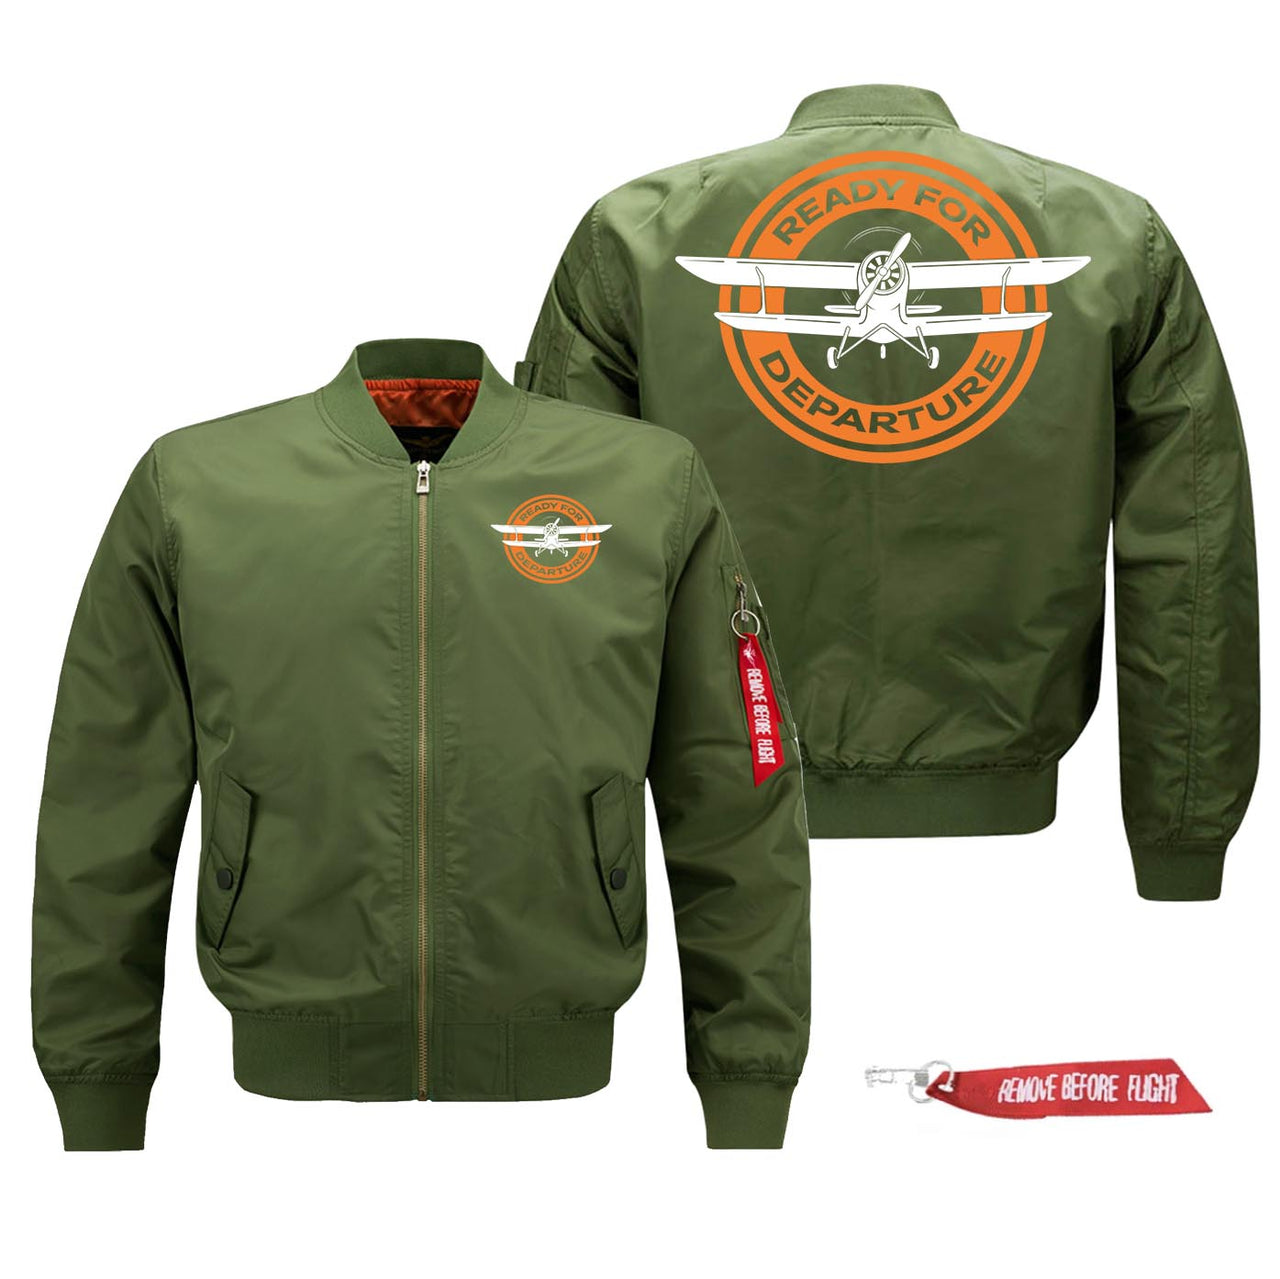 Ready for Departure Designed Pilot Jackets (Customizable)